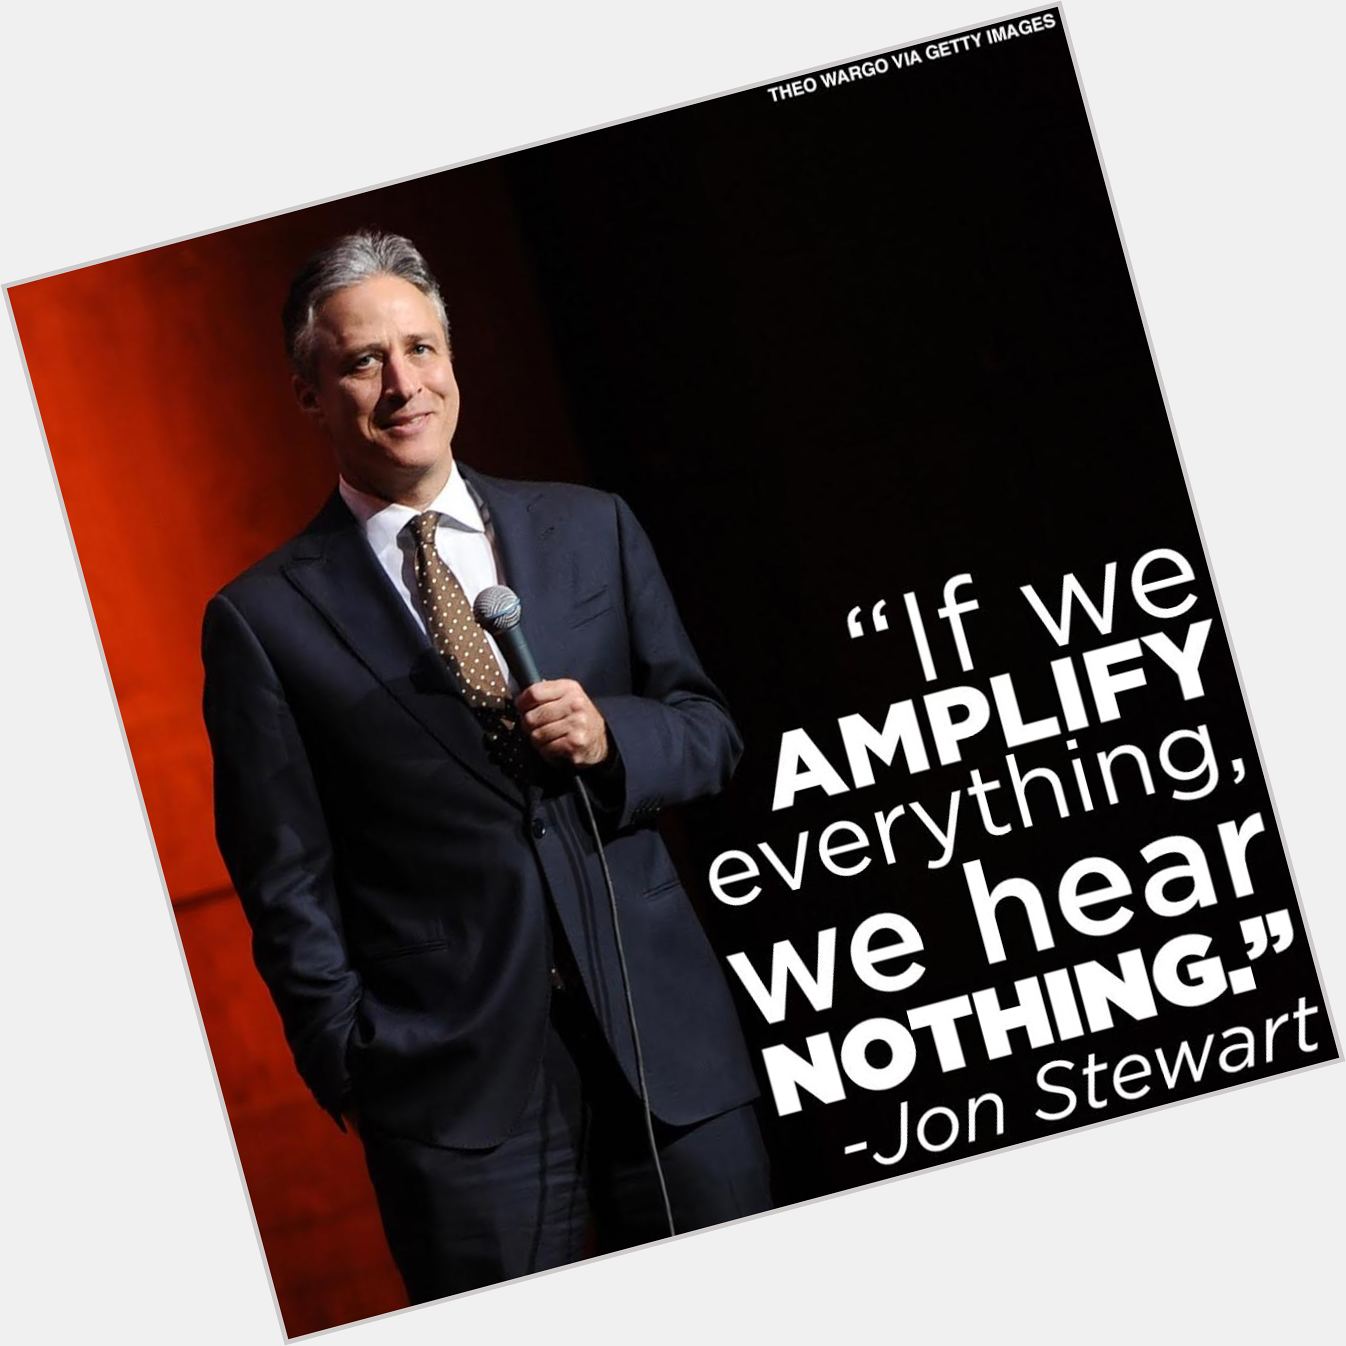 Happy Birthday, Jon Stewart! Thank you for sharing your humor and your wisdom with us all 